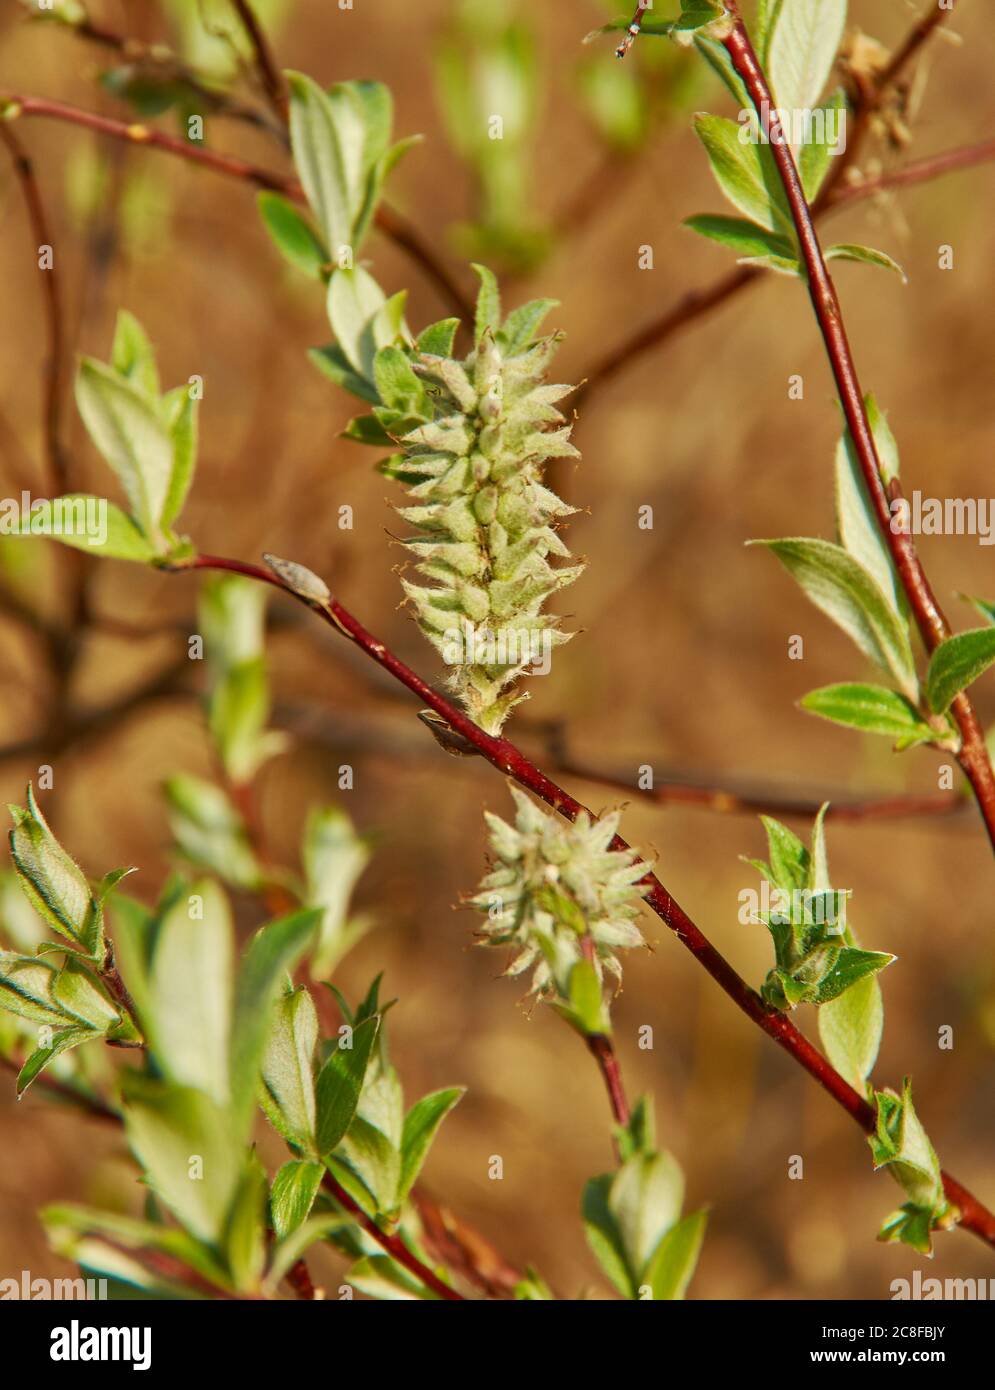 Salix lapponum, downy willow, having a wide distribution in Northern Europe Stock Photo